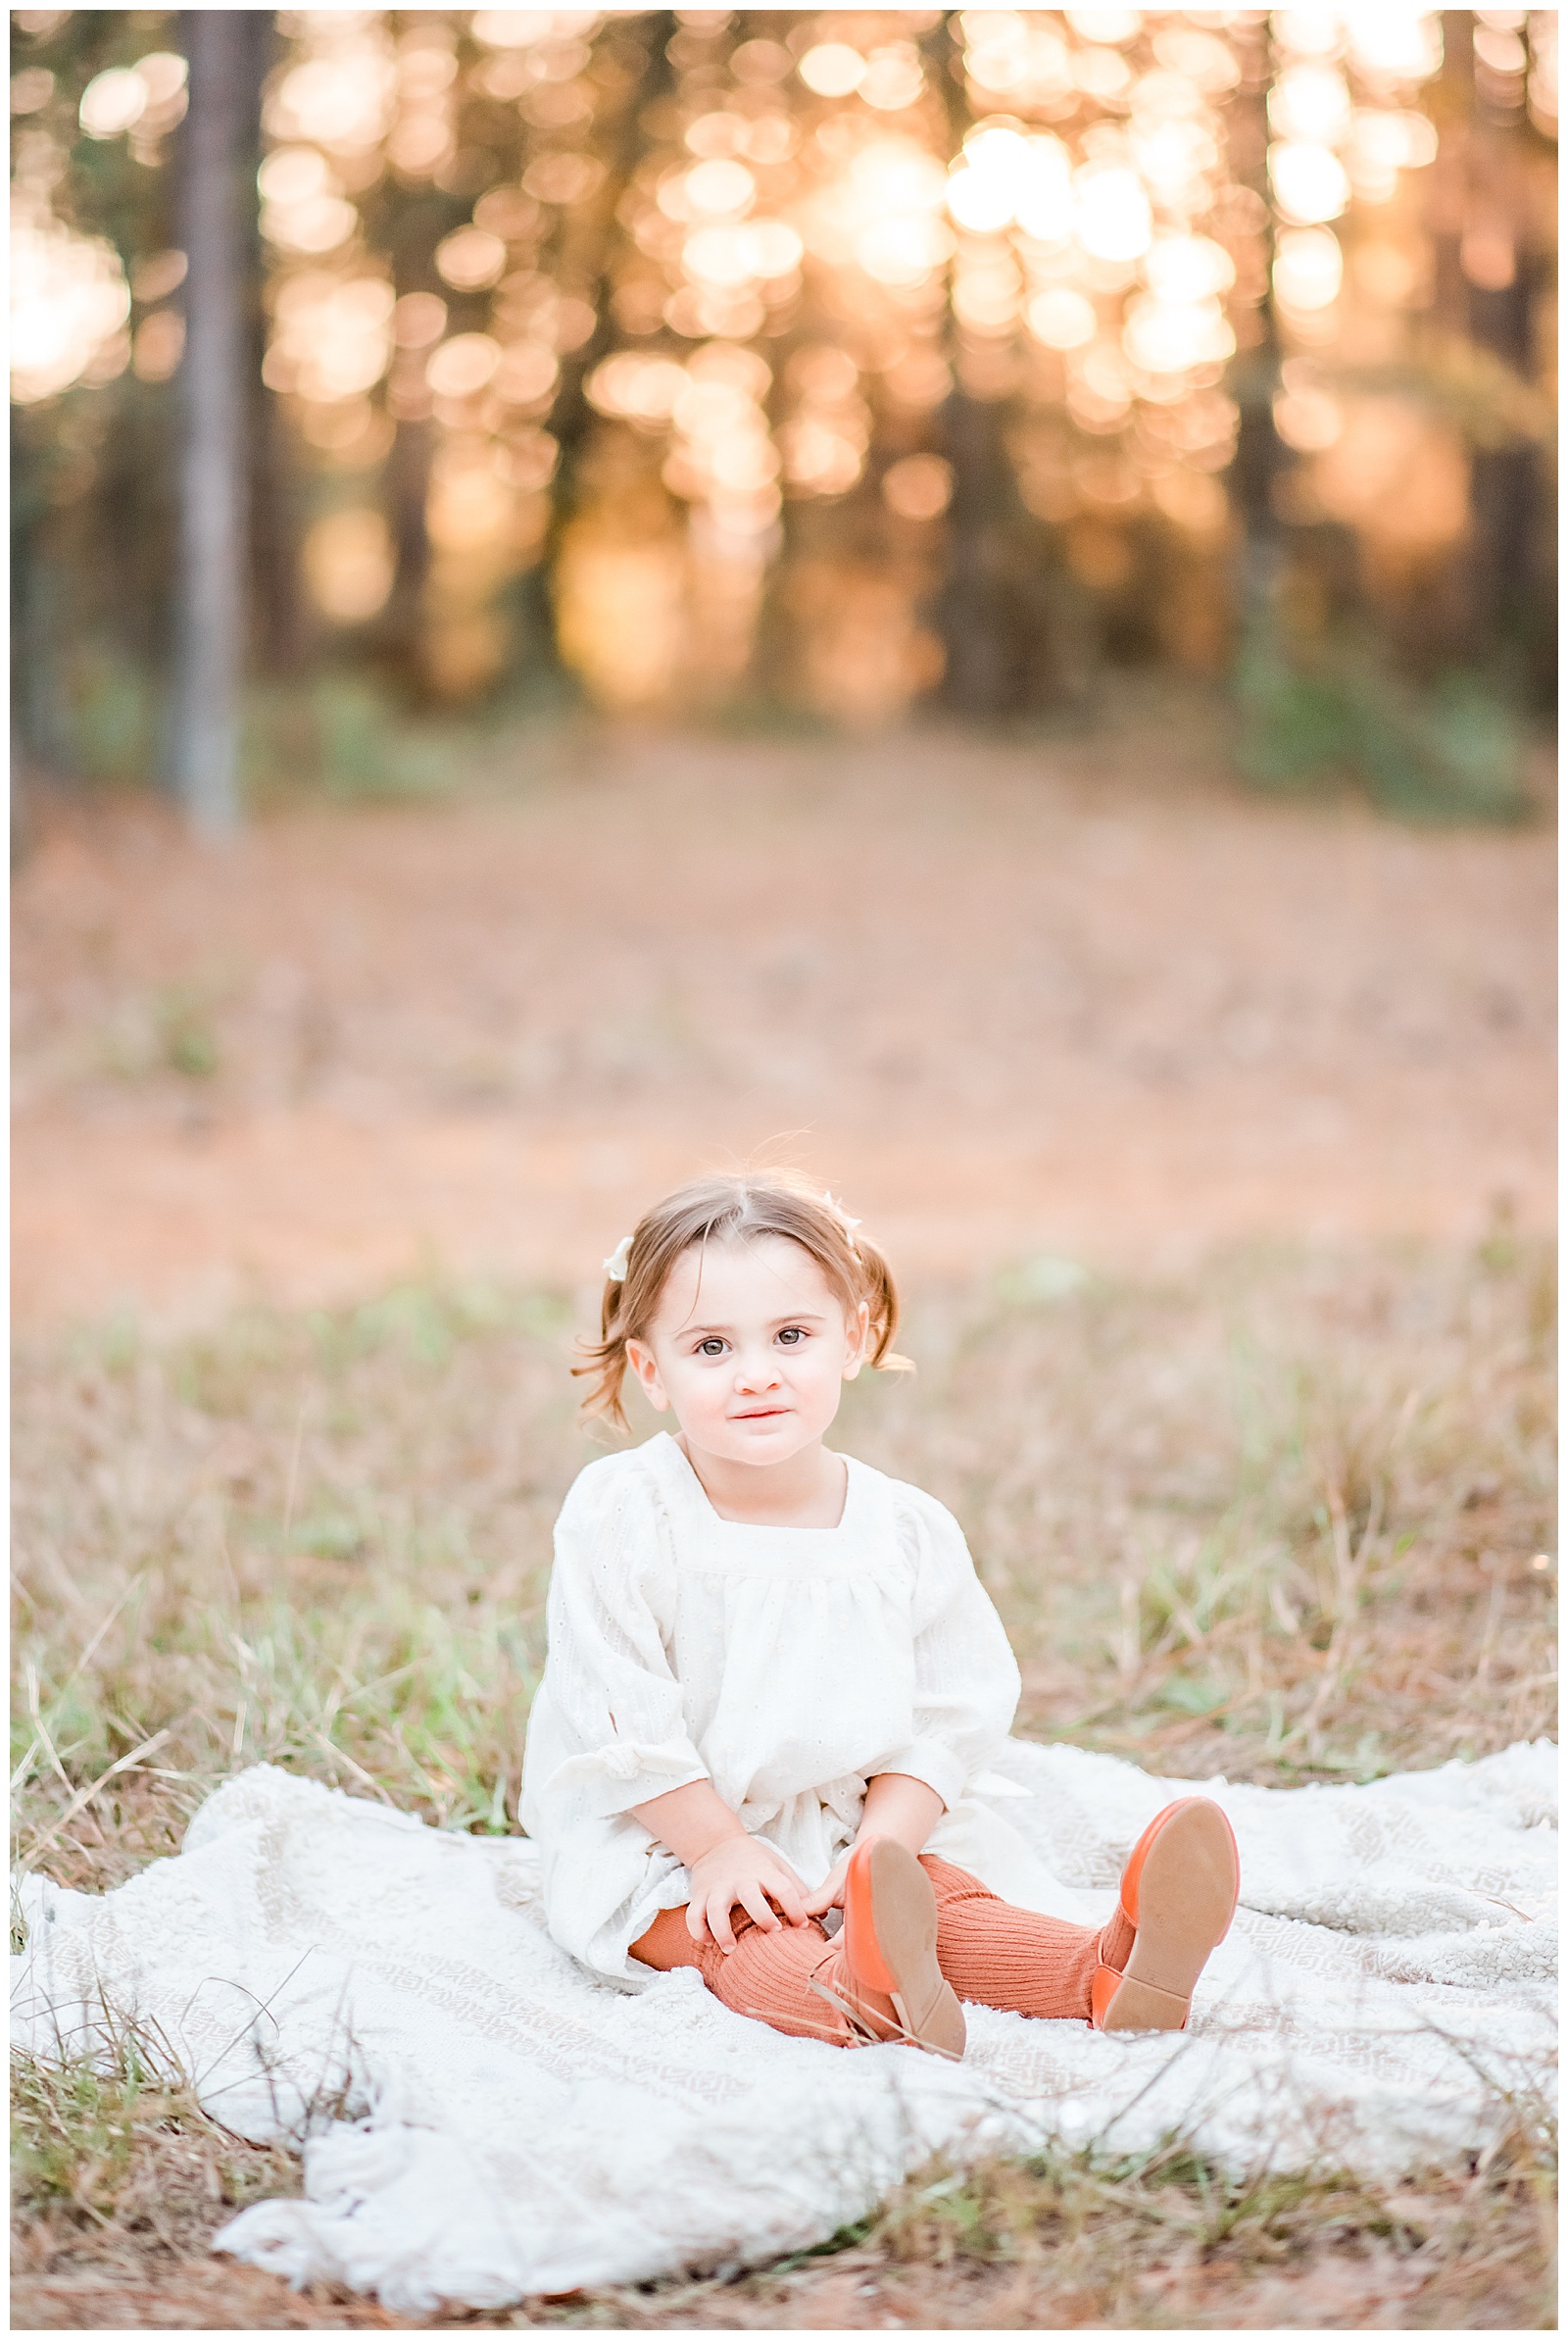 Baby and Child Photography in The Woodlands